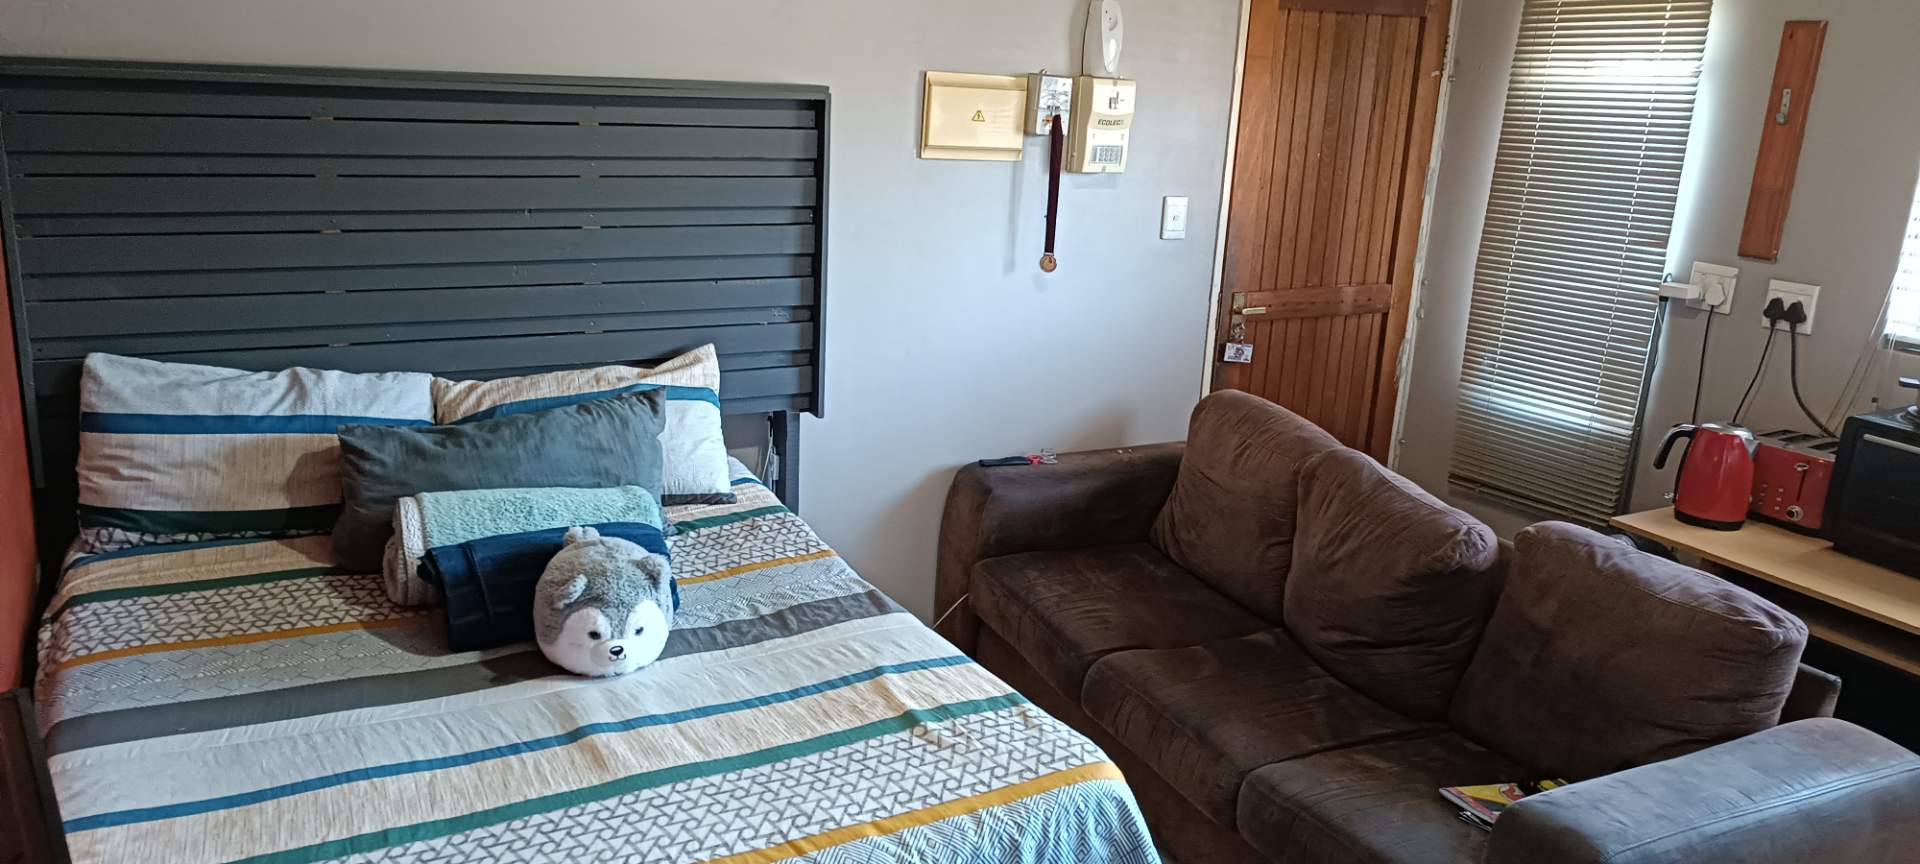 1 Bedroom Property for Sale in Willows Free State